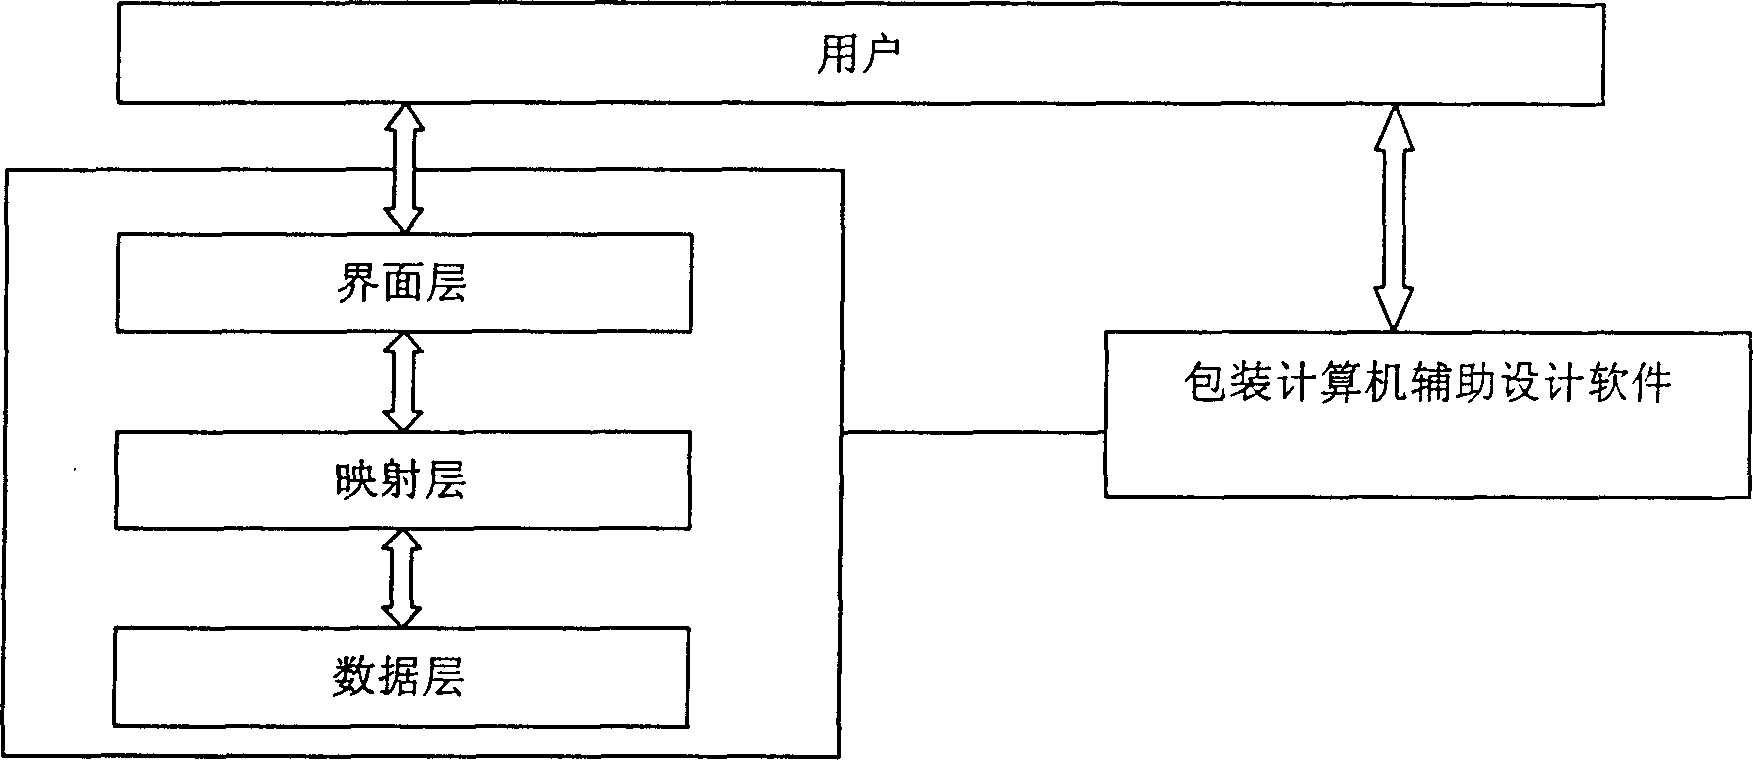 Extendible packaging box type store class managing and indexing method